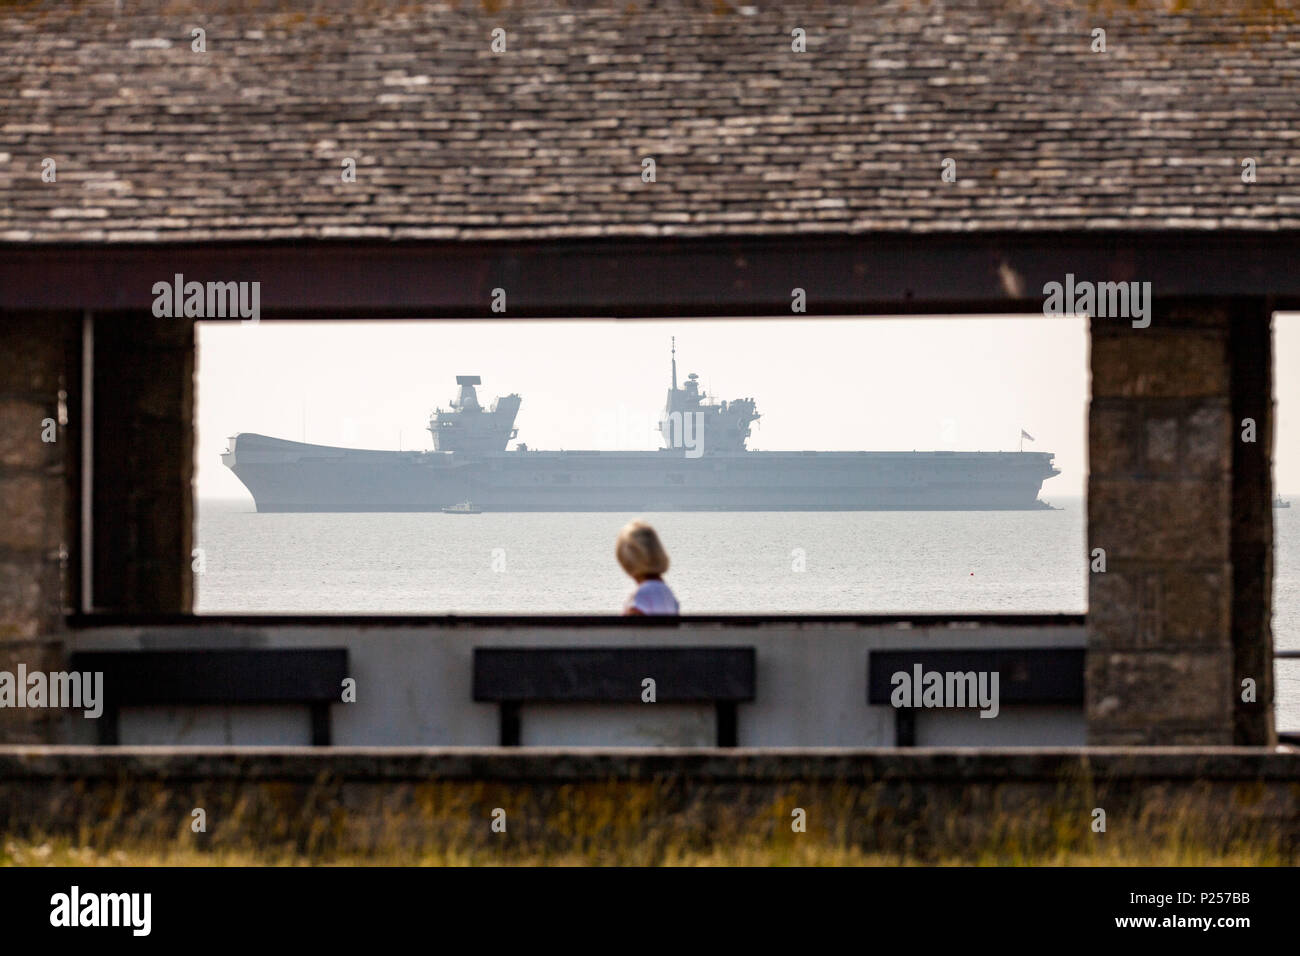 Aircraft carrier HMS Queen Elizabeth visits Penzance in Mount's Bay, Cornwall Stock Photo